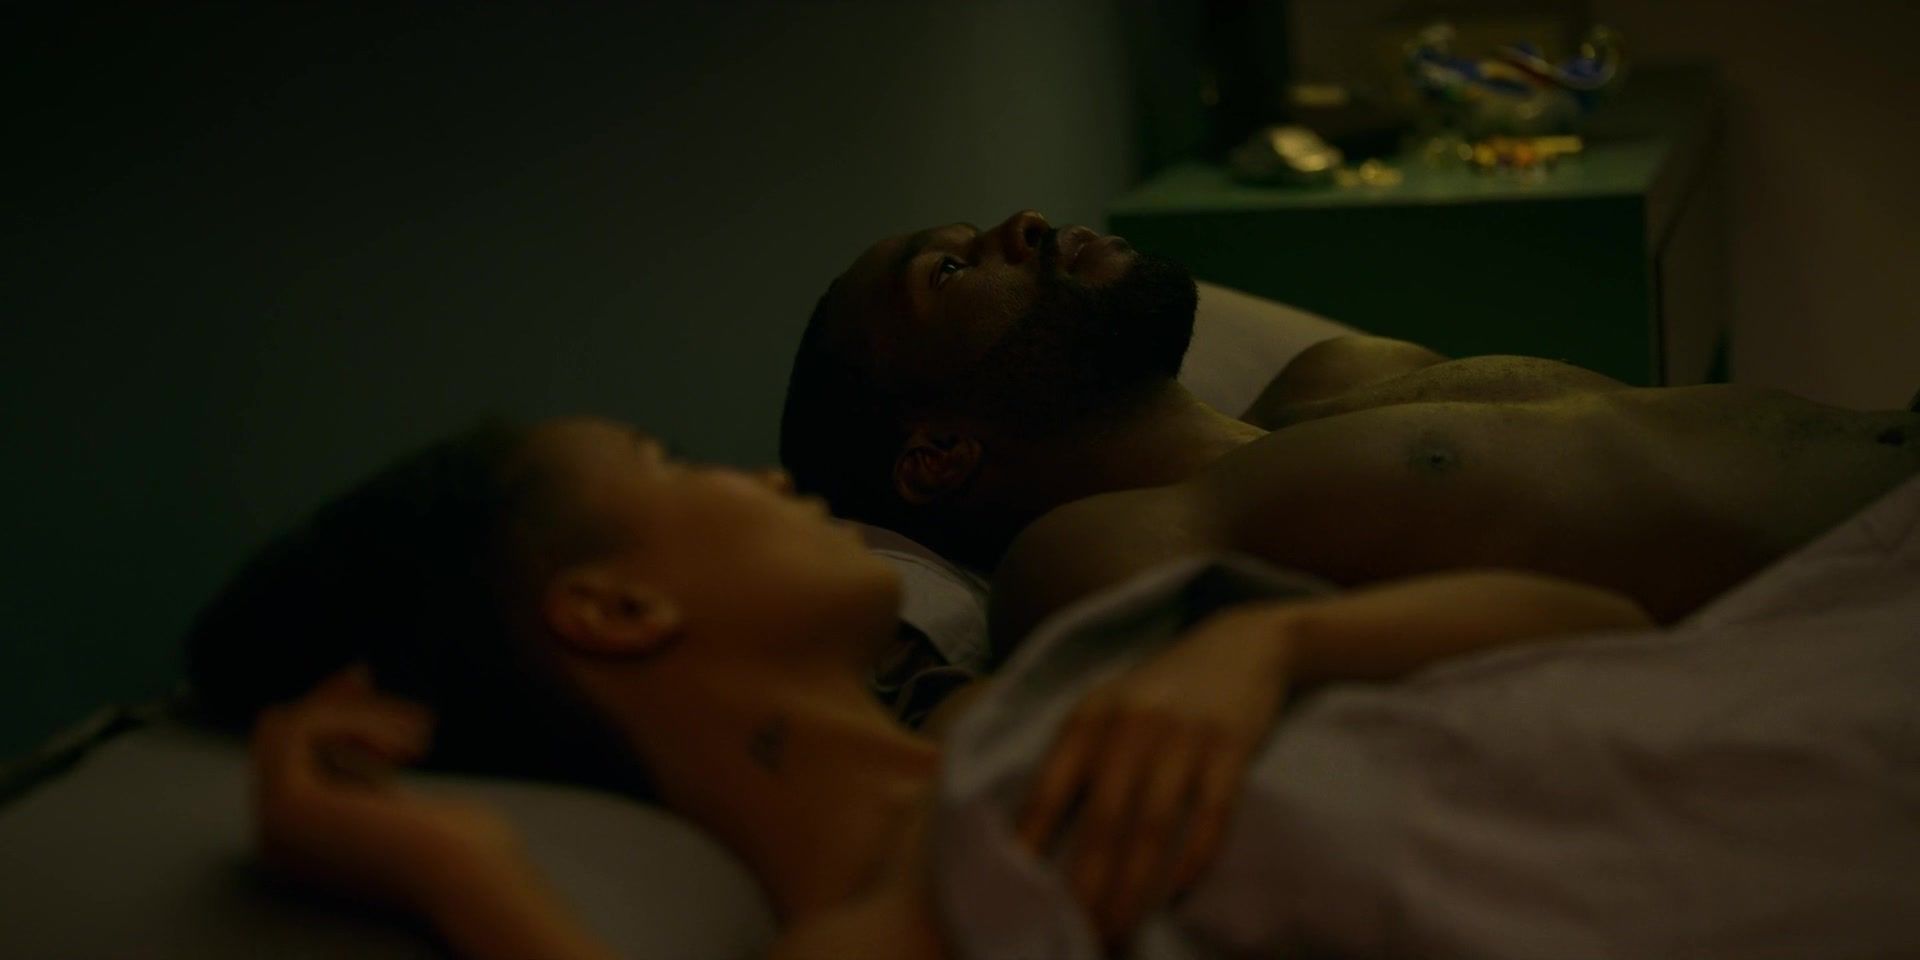 Hot Girls Getting Fucked Nicole Beharie nude - Black Mirror s05e01 (2019) TheFappening - 1